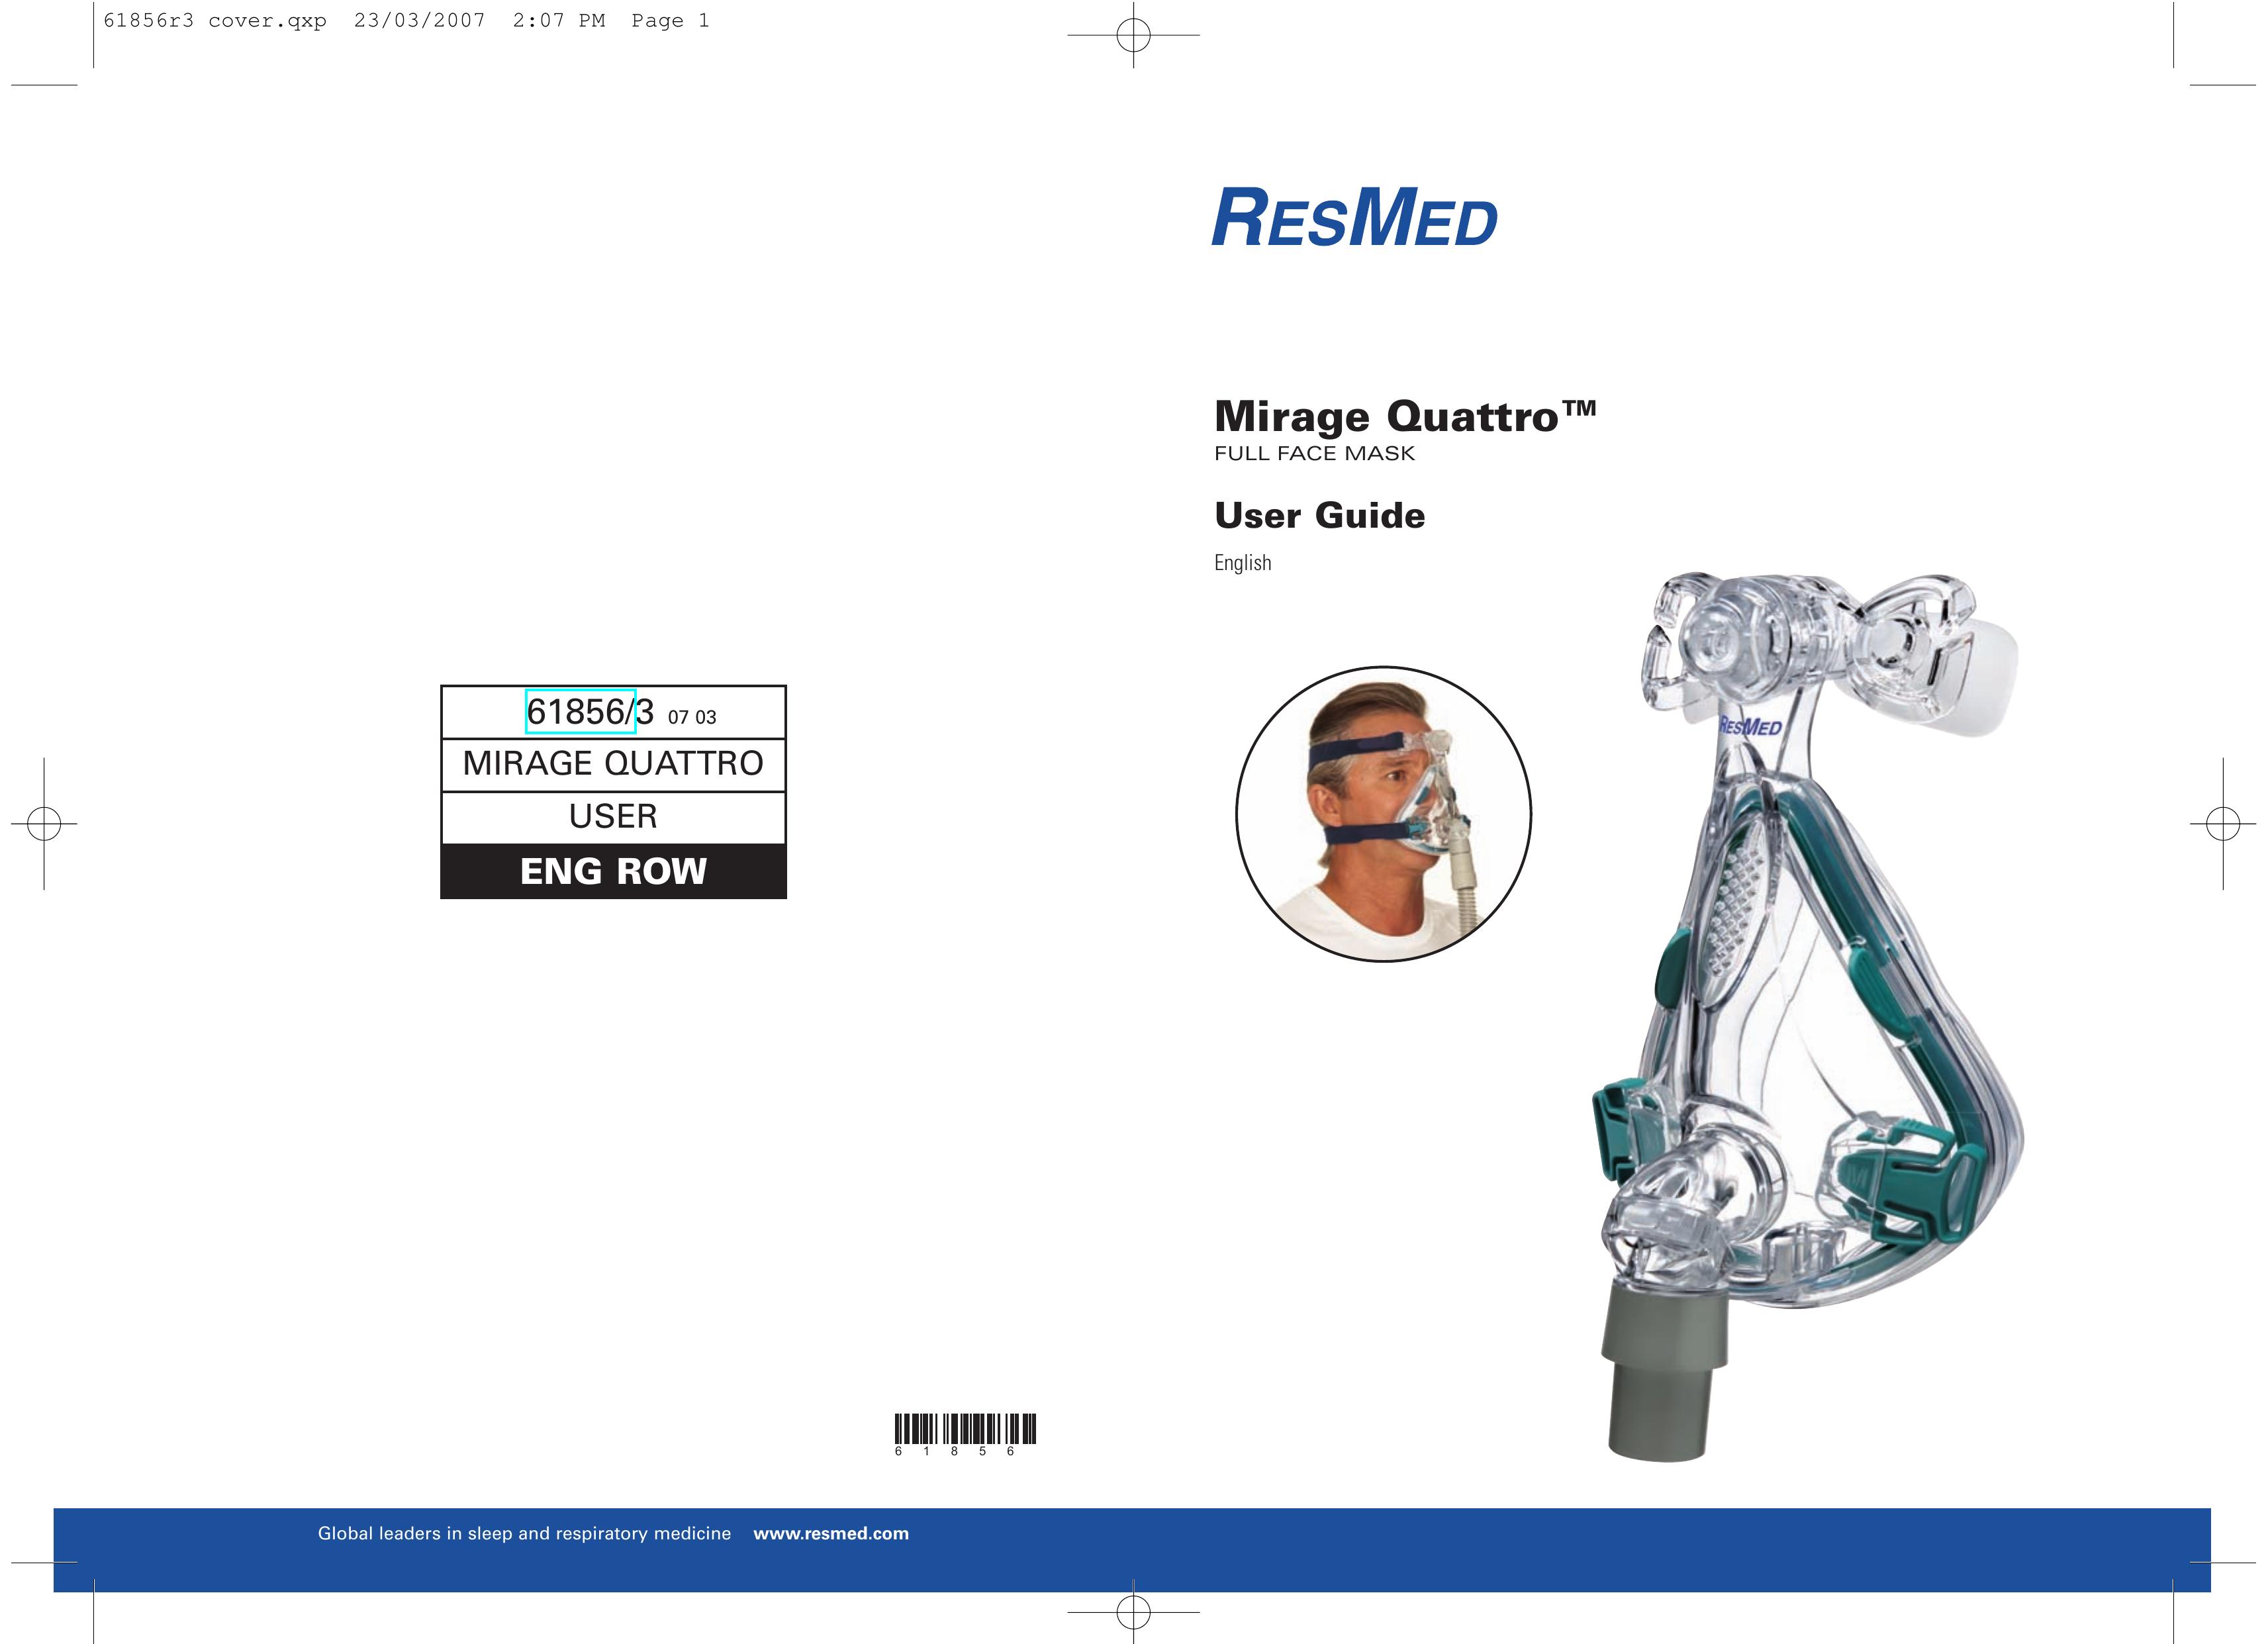 ResMed Mirage Quattro Respiratory Product User Manual